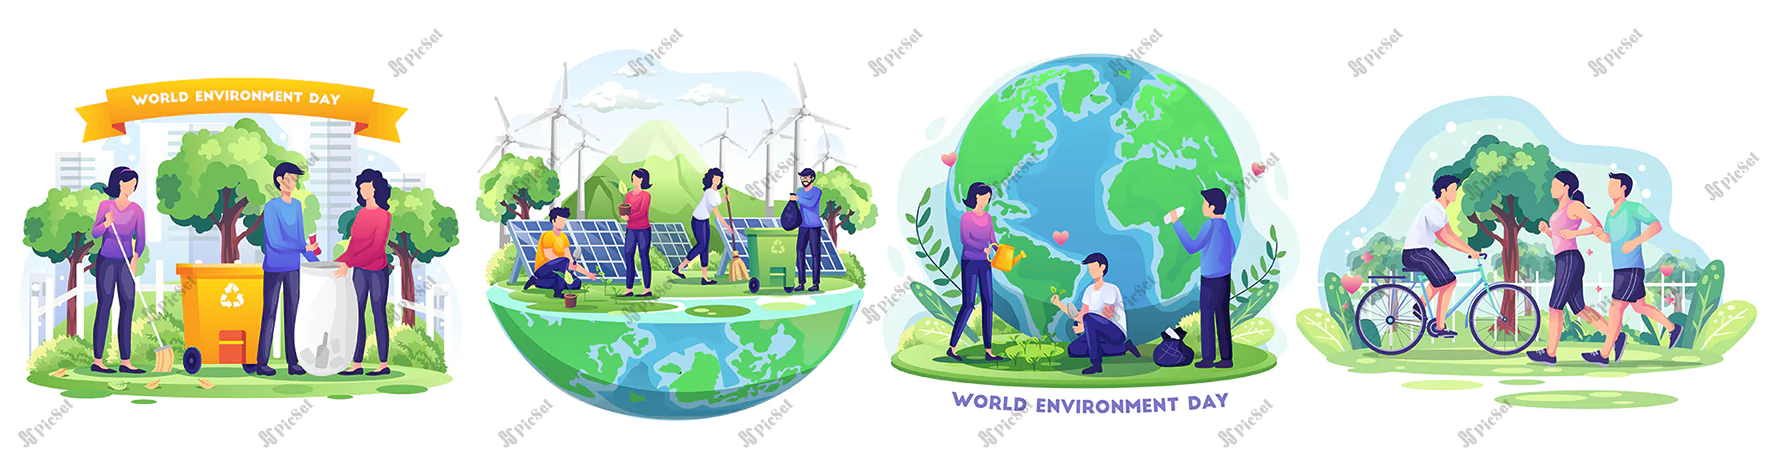 set world environment day with people are taking care earth by gardening cleaning / روز جهانی محیط زیست، نظافت باغبانی، مراقبت از زمین